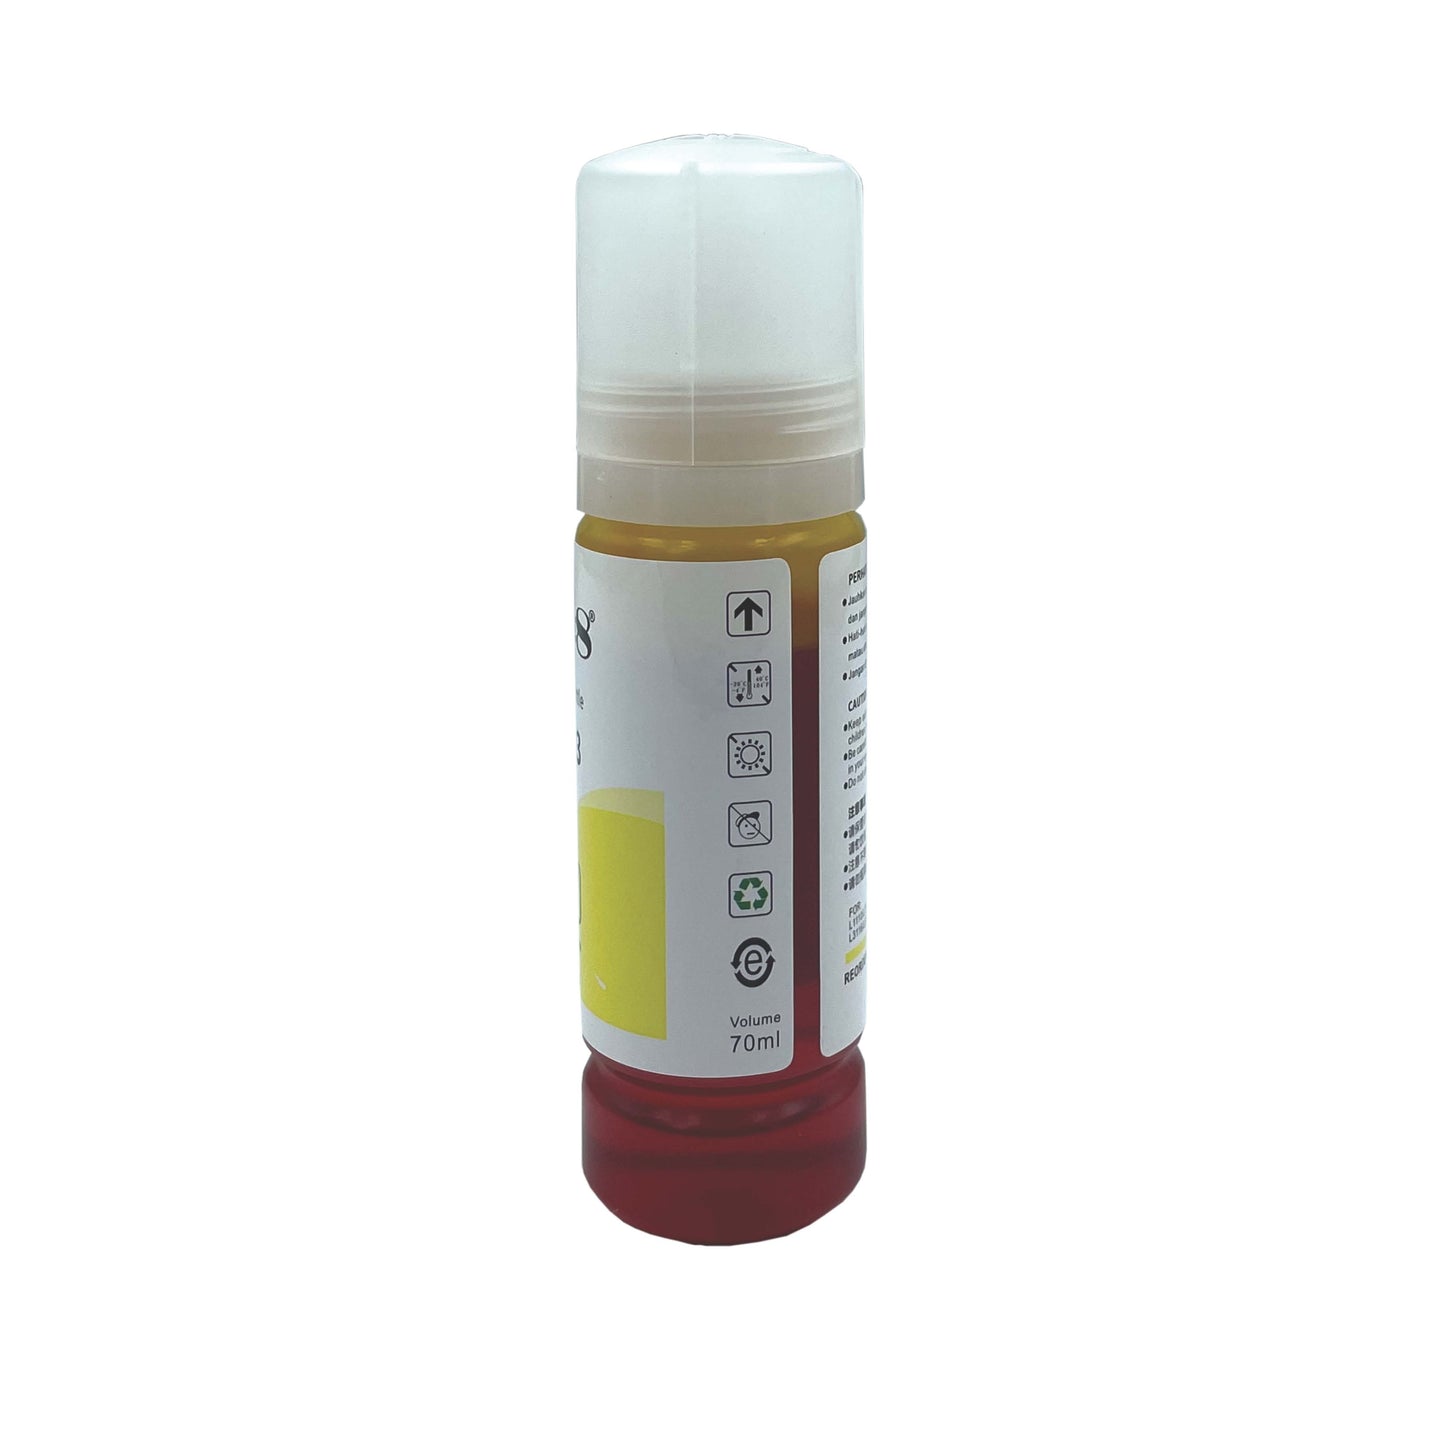 CRE8 | Compatible Epson 003 Refill Bottle Ink (Yellow)